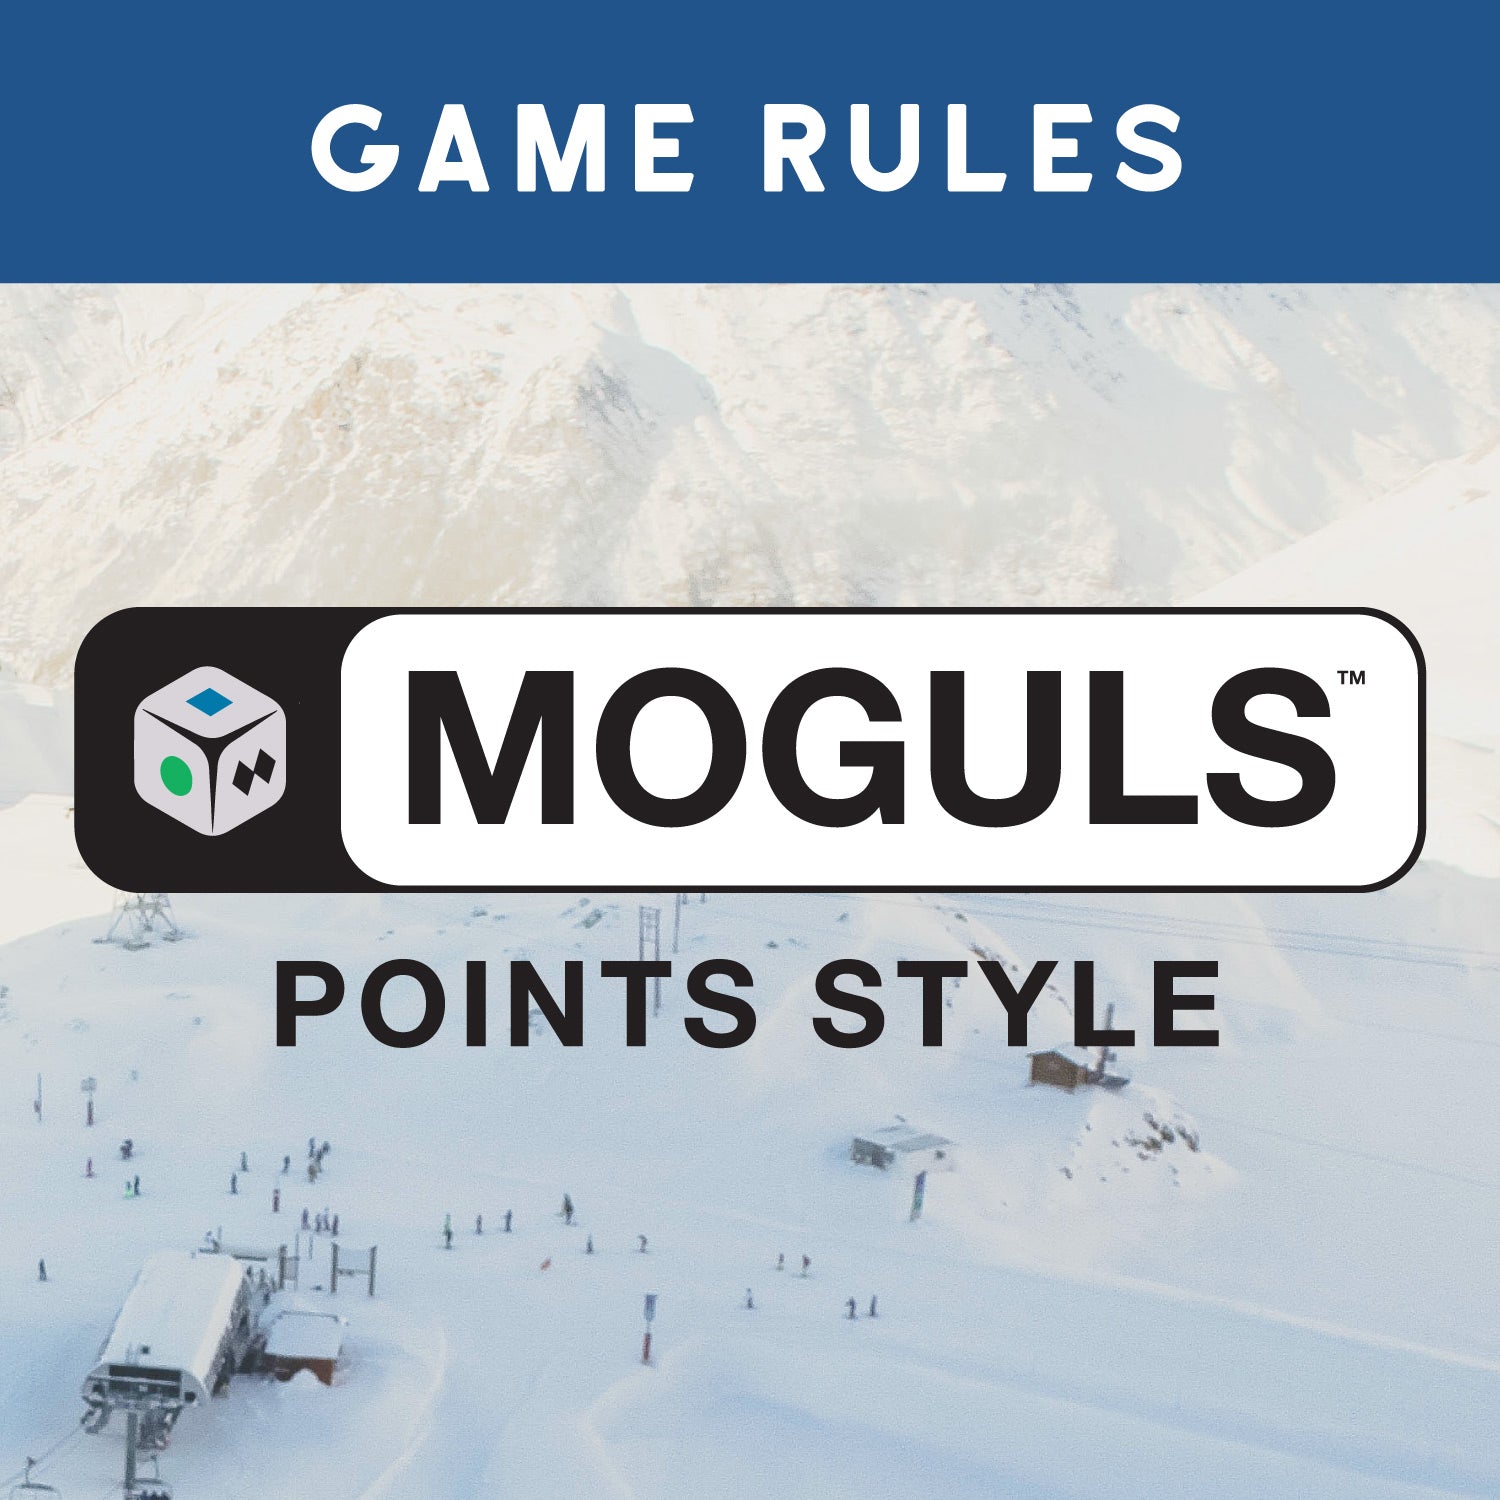 Moguls Rules - Points Style